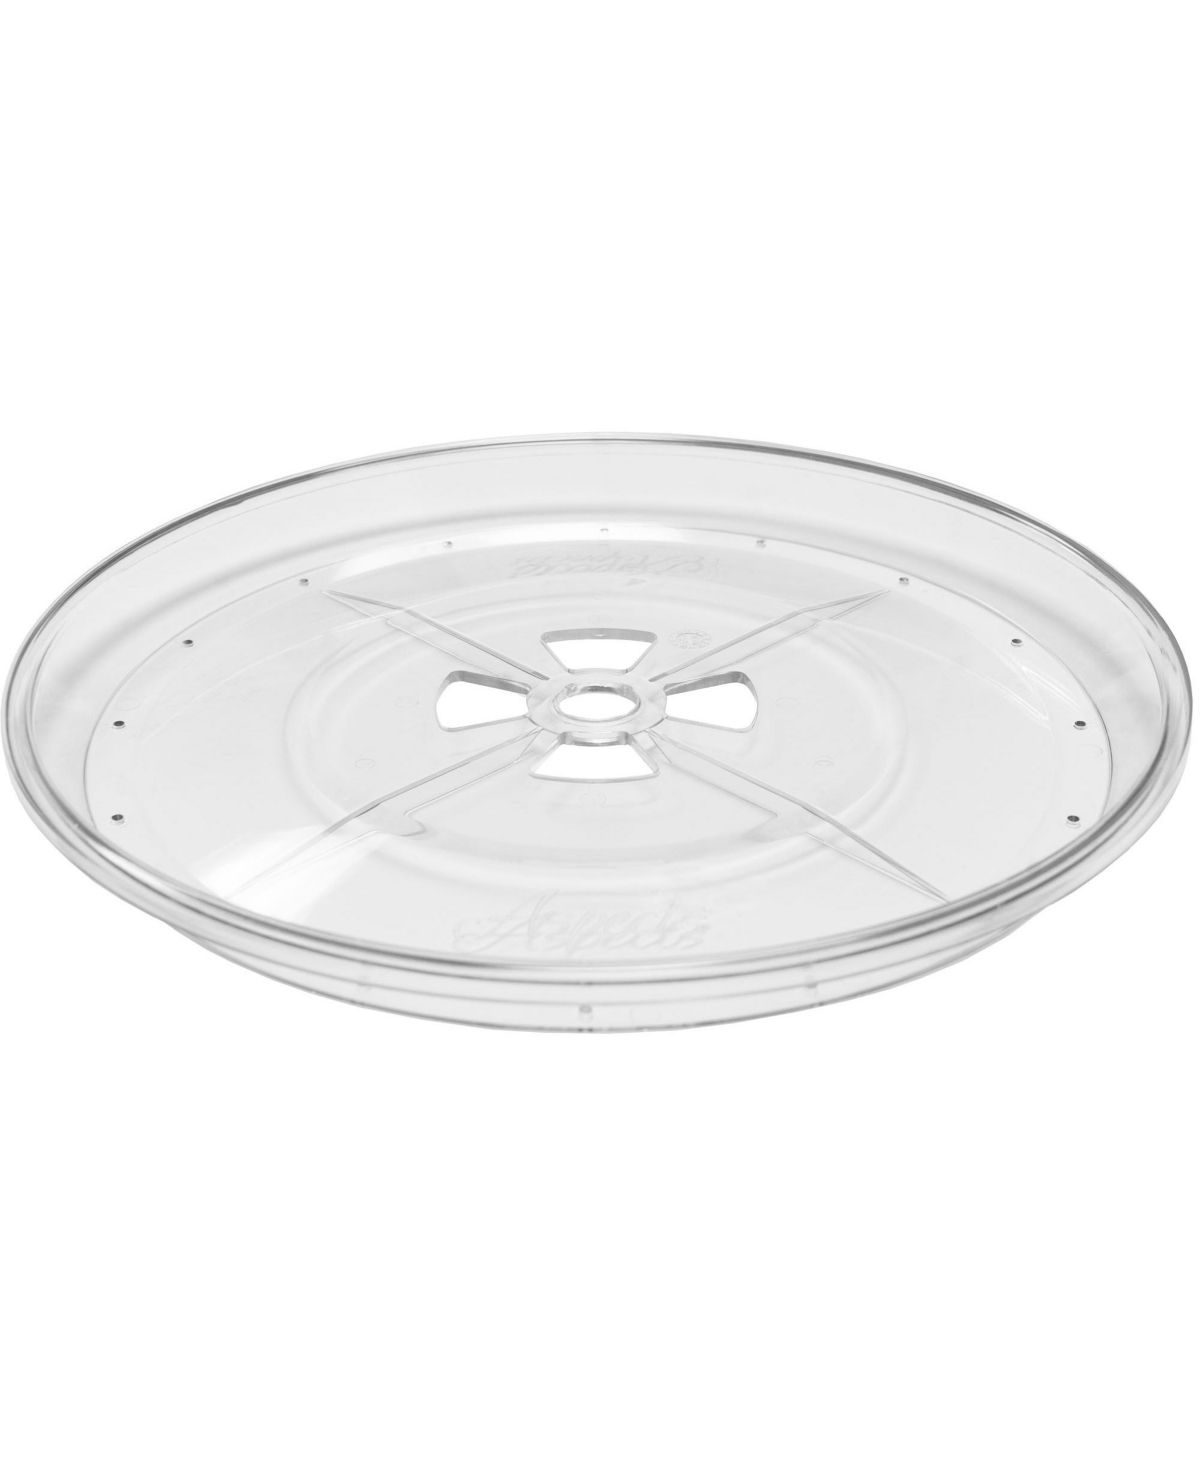 Aspects Quick Clean Bigfoot Seed Tray, 12 inch diameter